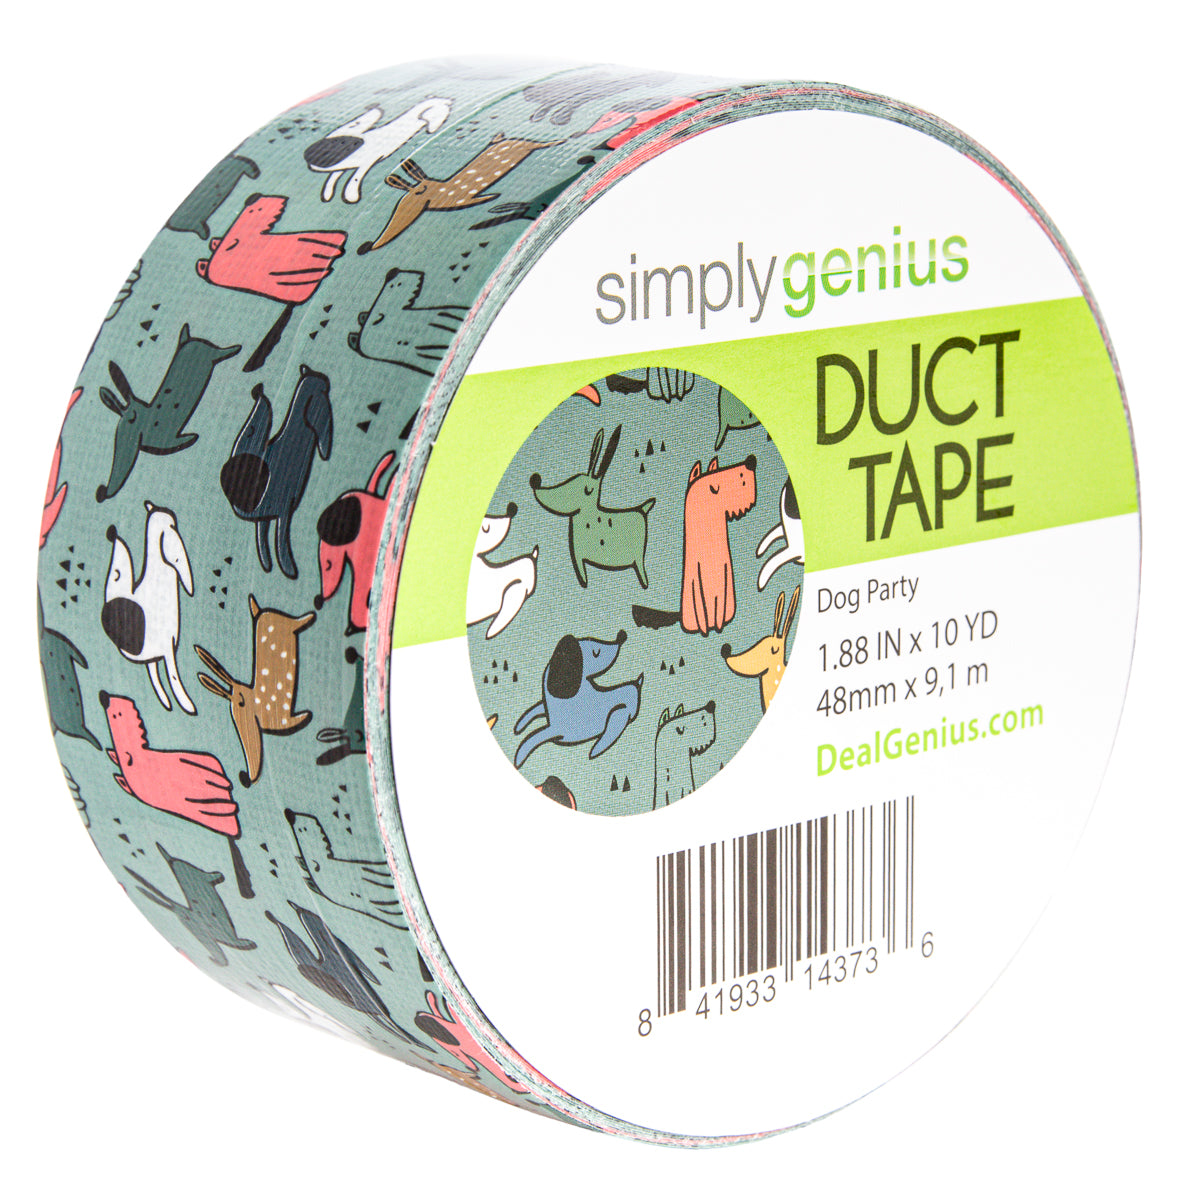 Simply Genius Duct Tape Roll Colors Patterns Craft Supplies Colored &  Patterned